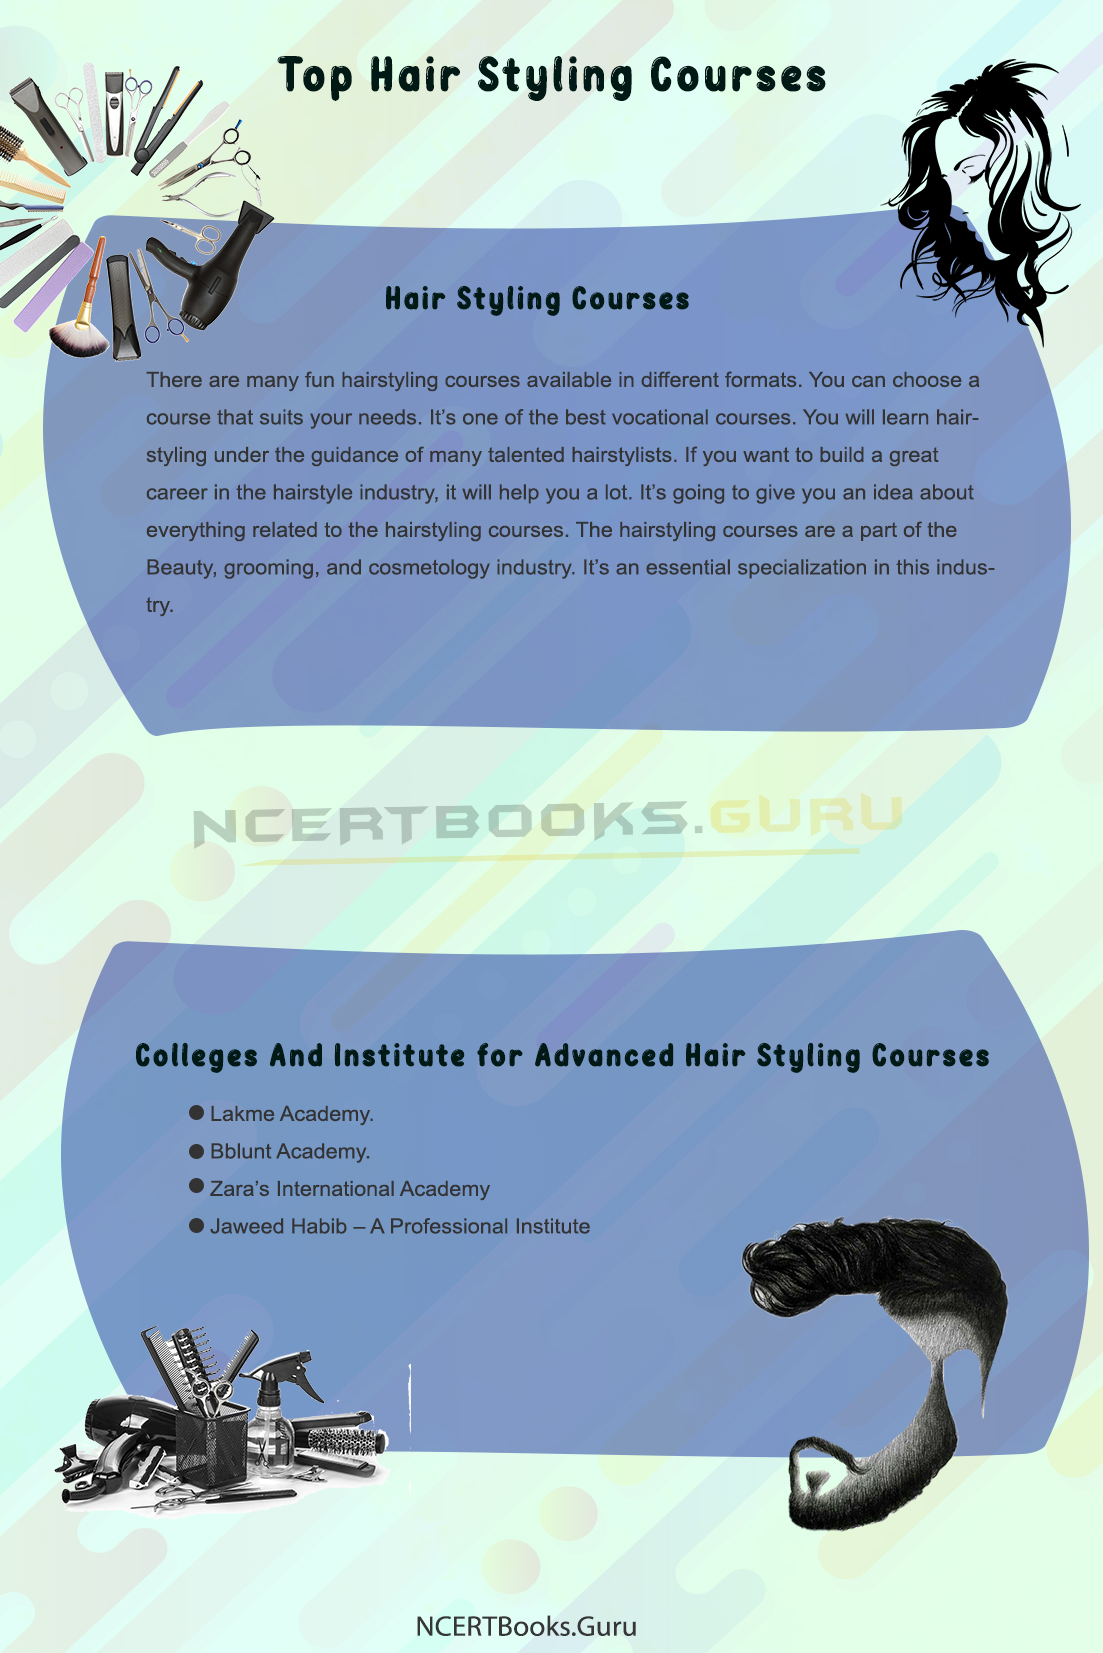 Hair Styling Courses | Course Duration, Eligibility Criteria, Career, Jobs